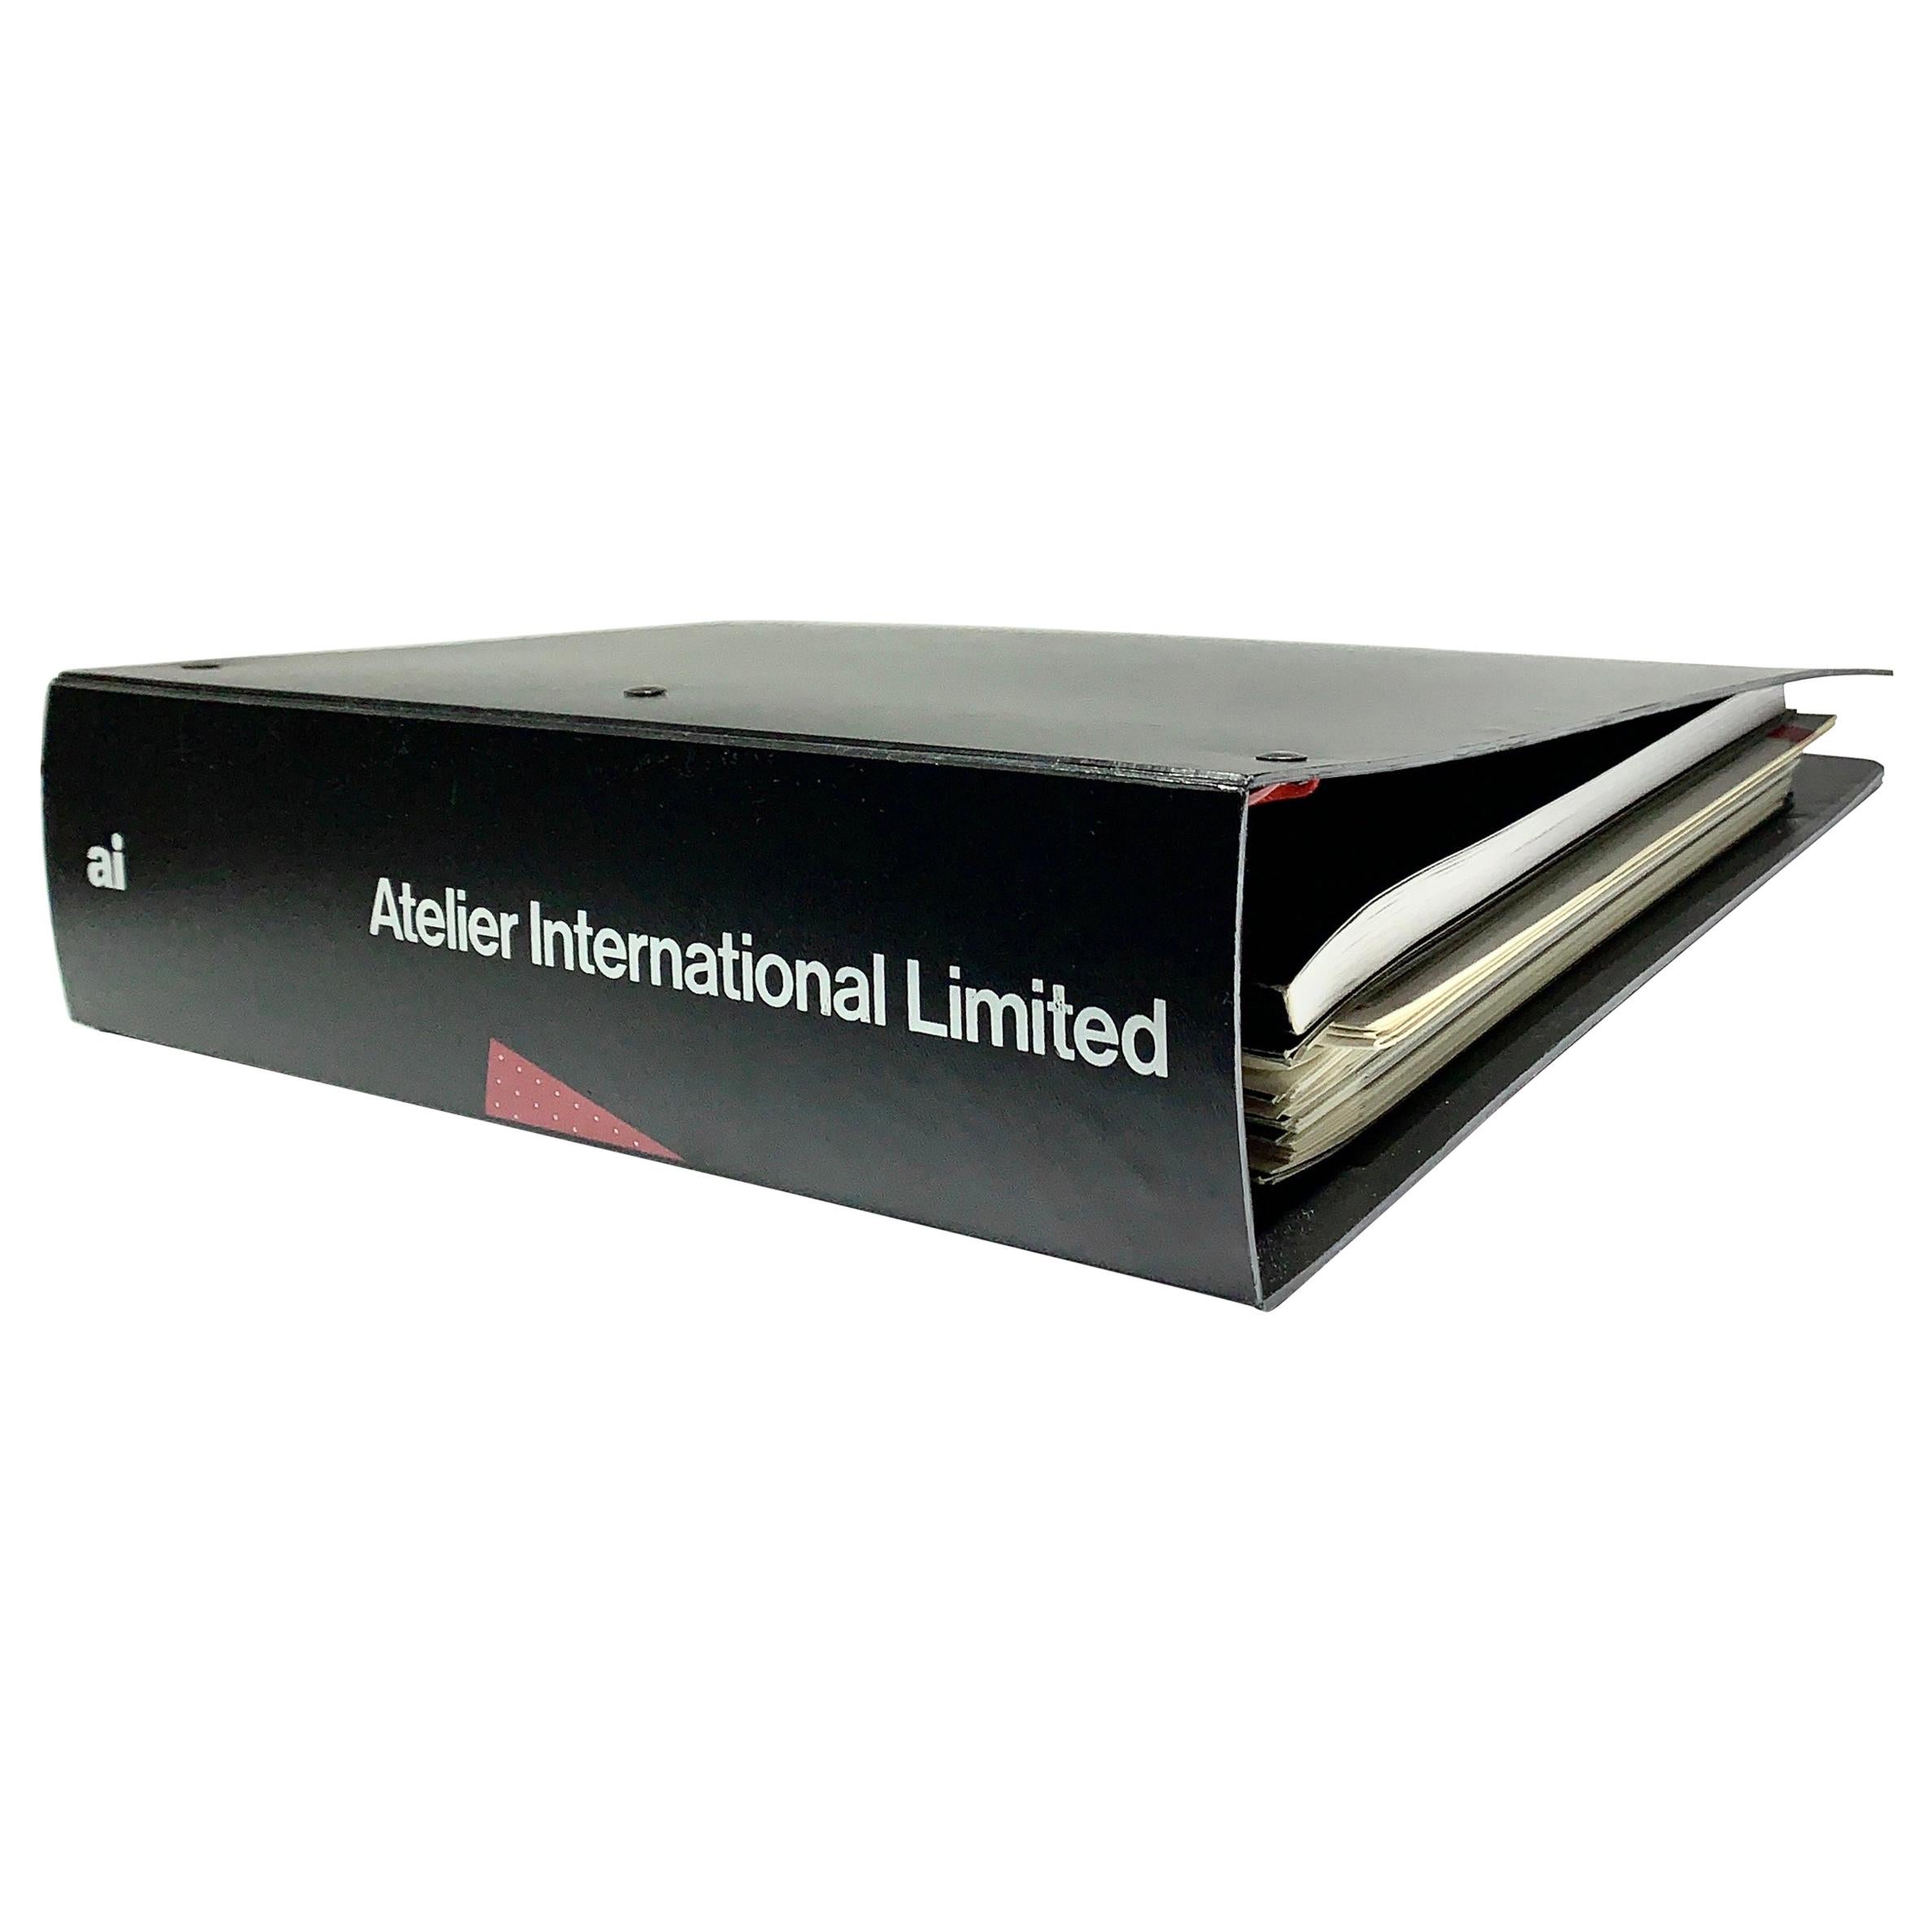 Atelier International Limited & Cassina Trade Catalogue Binder, 1988 For Sale